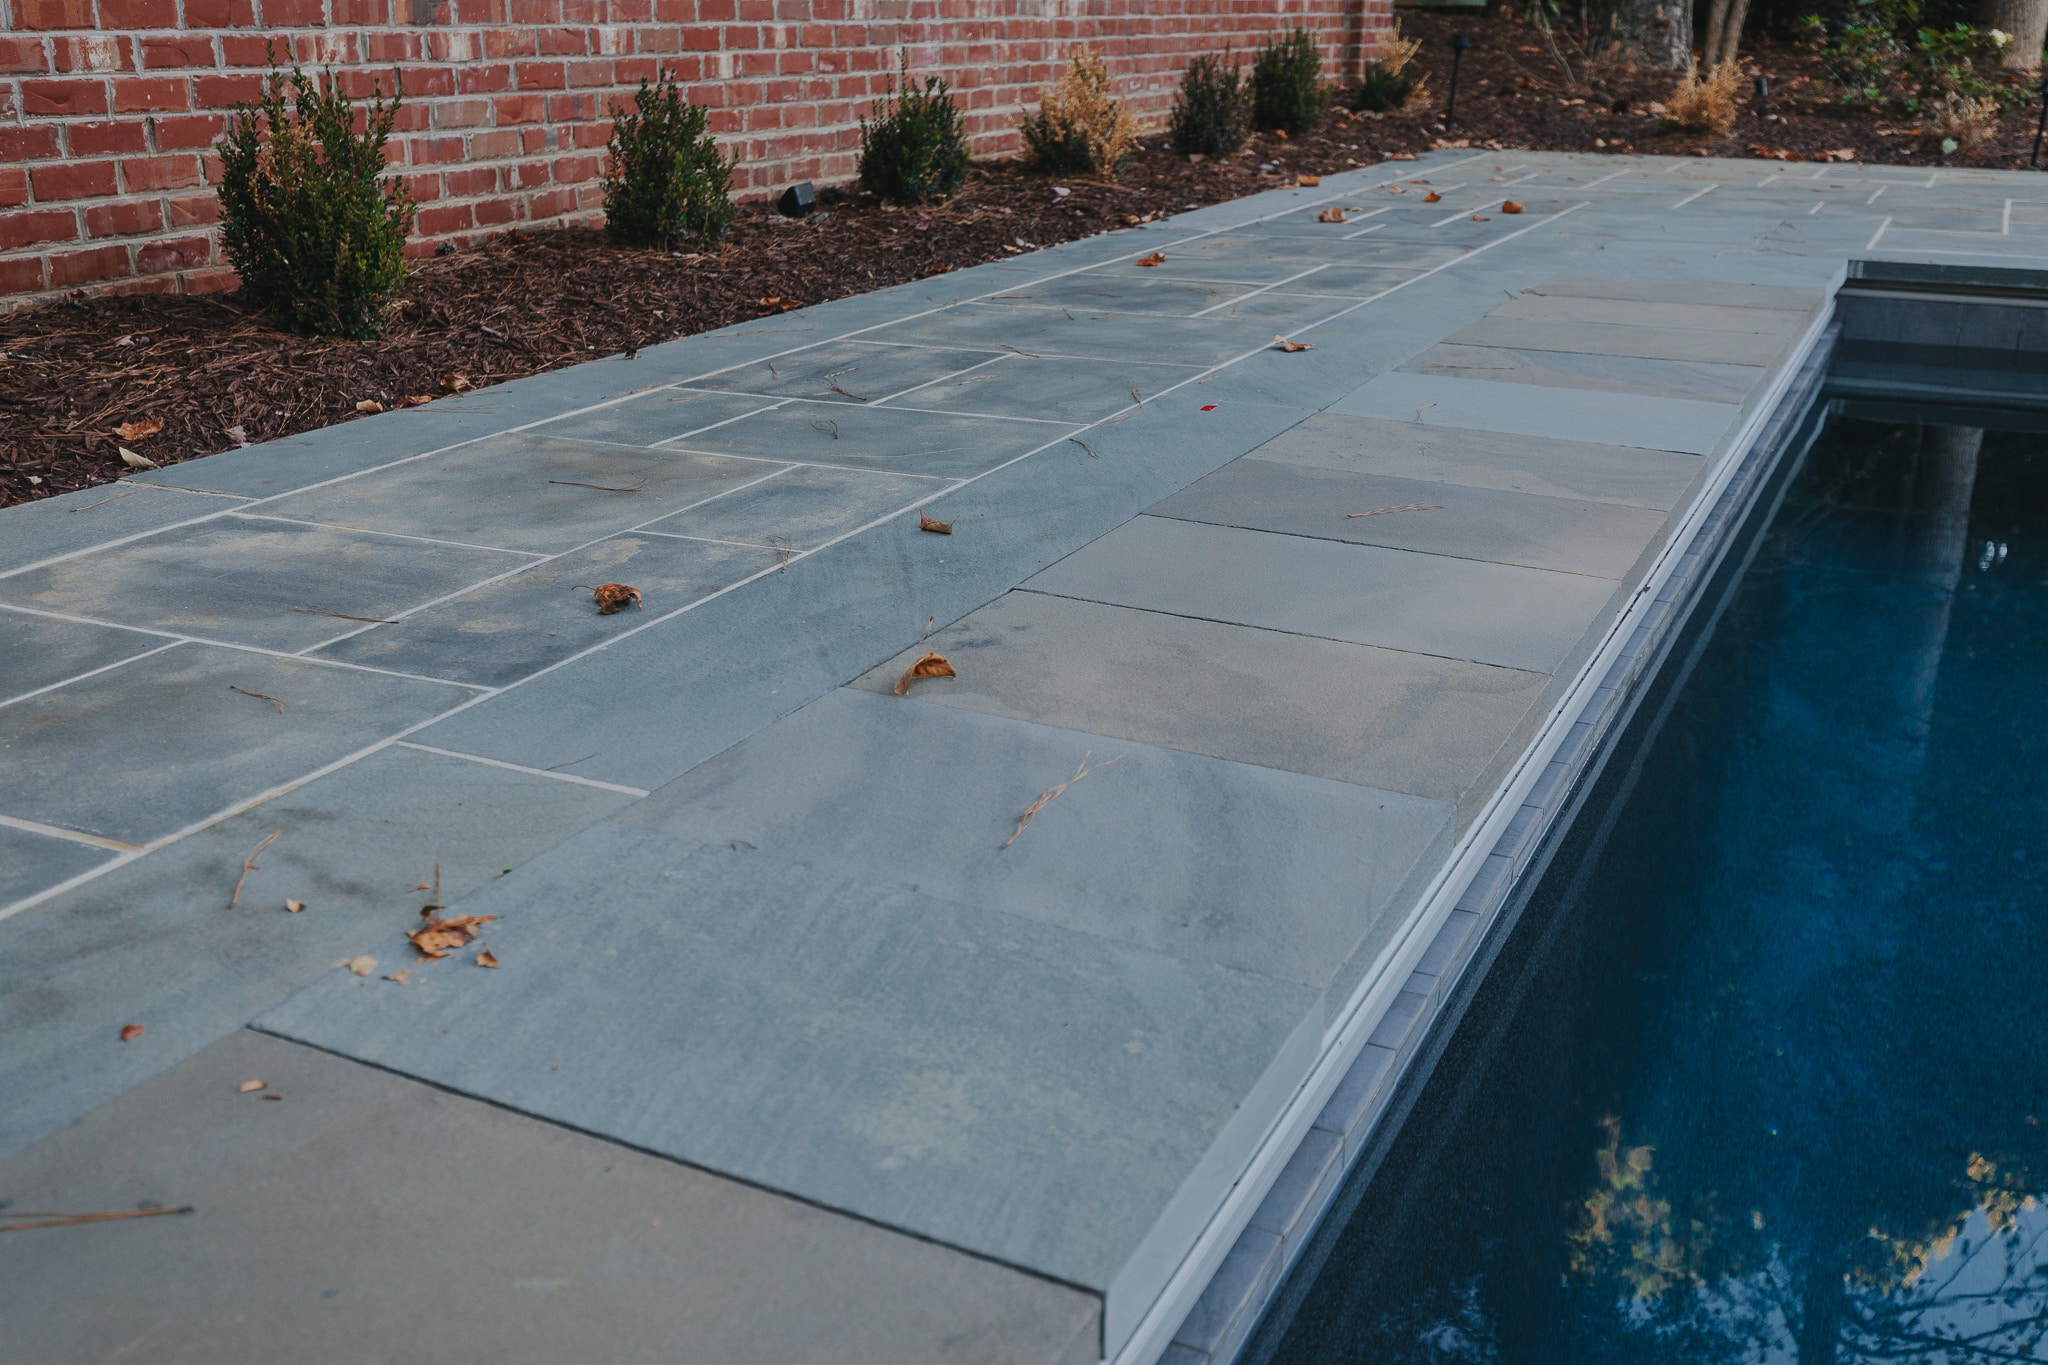 All About the Automatic Pool Cover, We Used - Chris Loves Julia